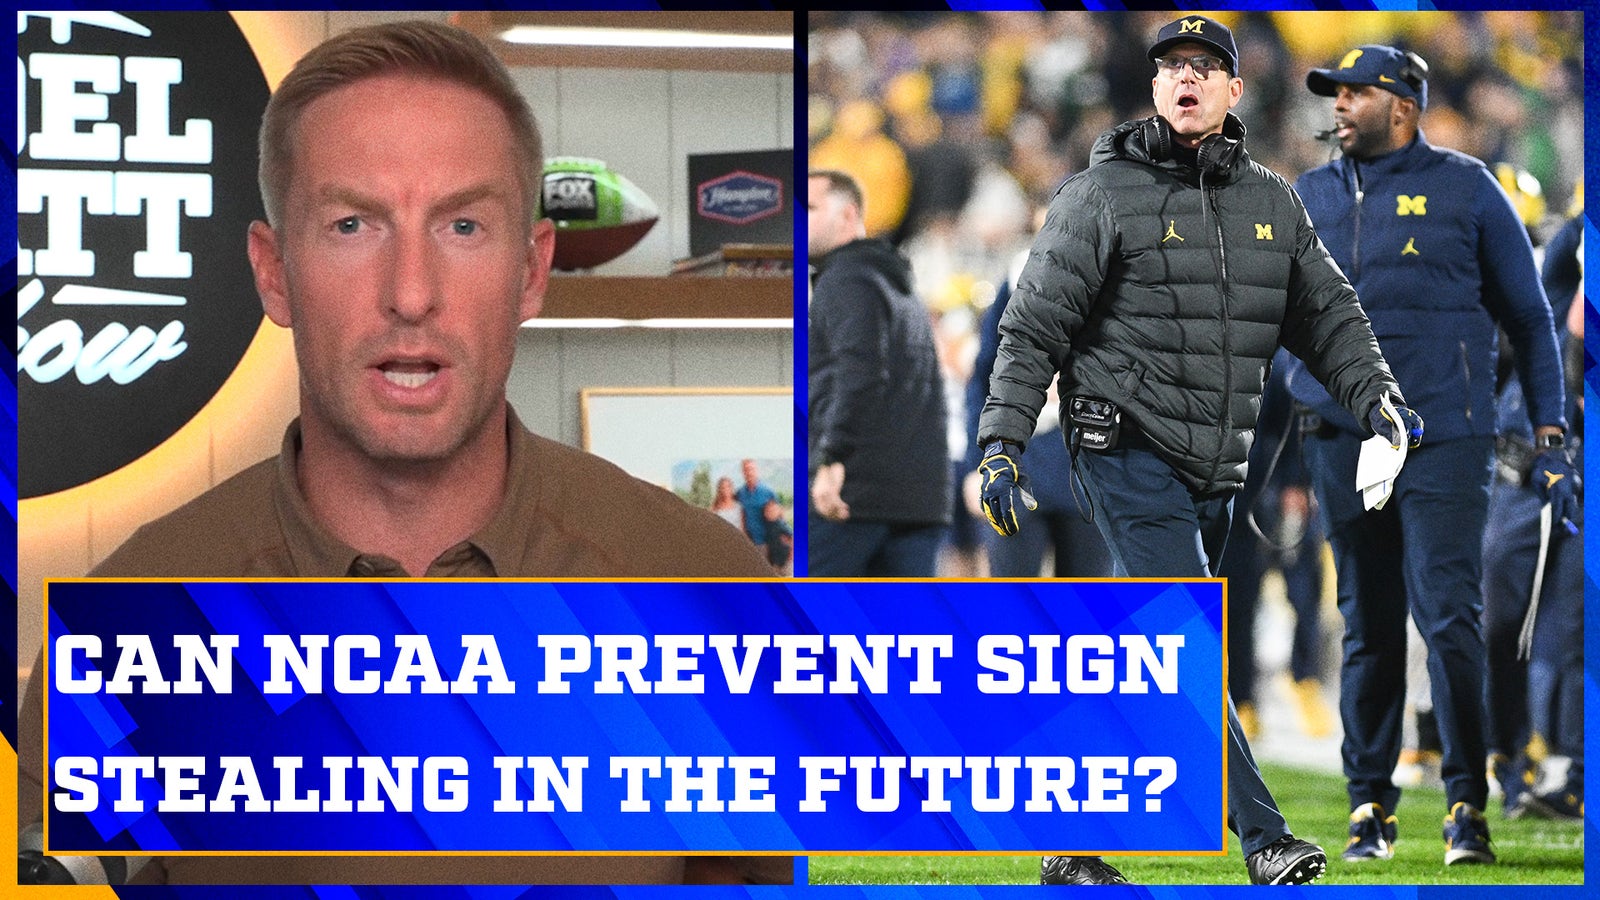 How can the NCAA make changes to avoid sign-stealing?